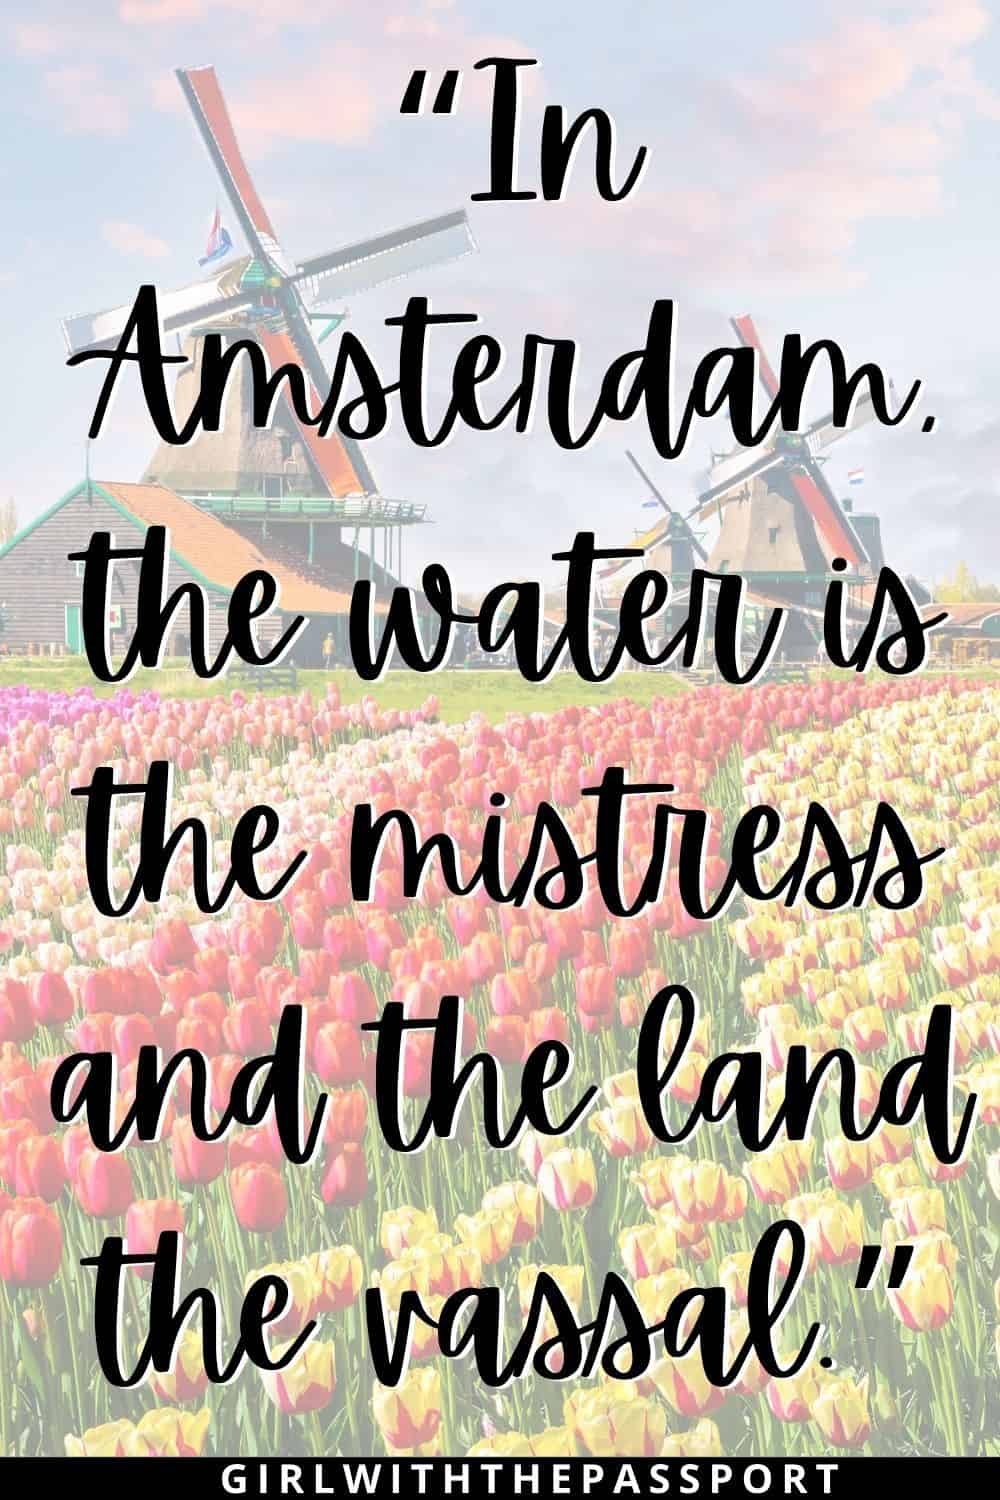 Quotes about Amsterdam